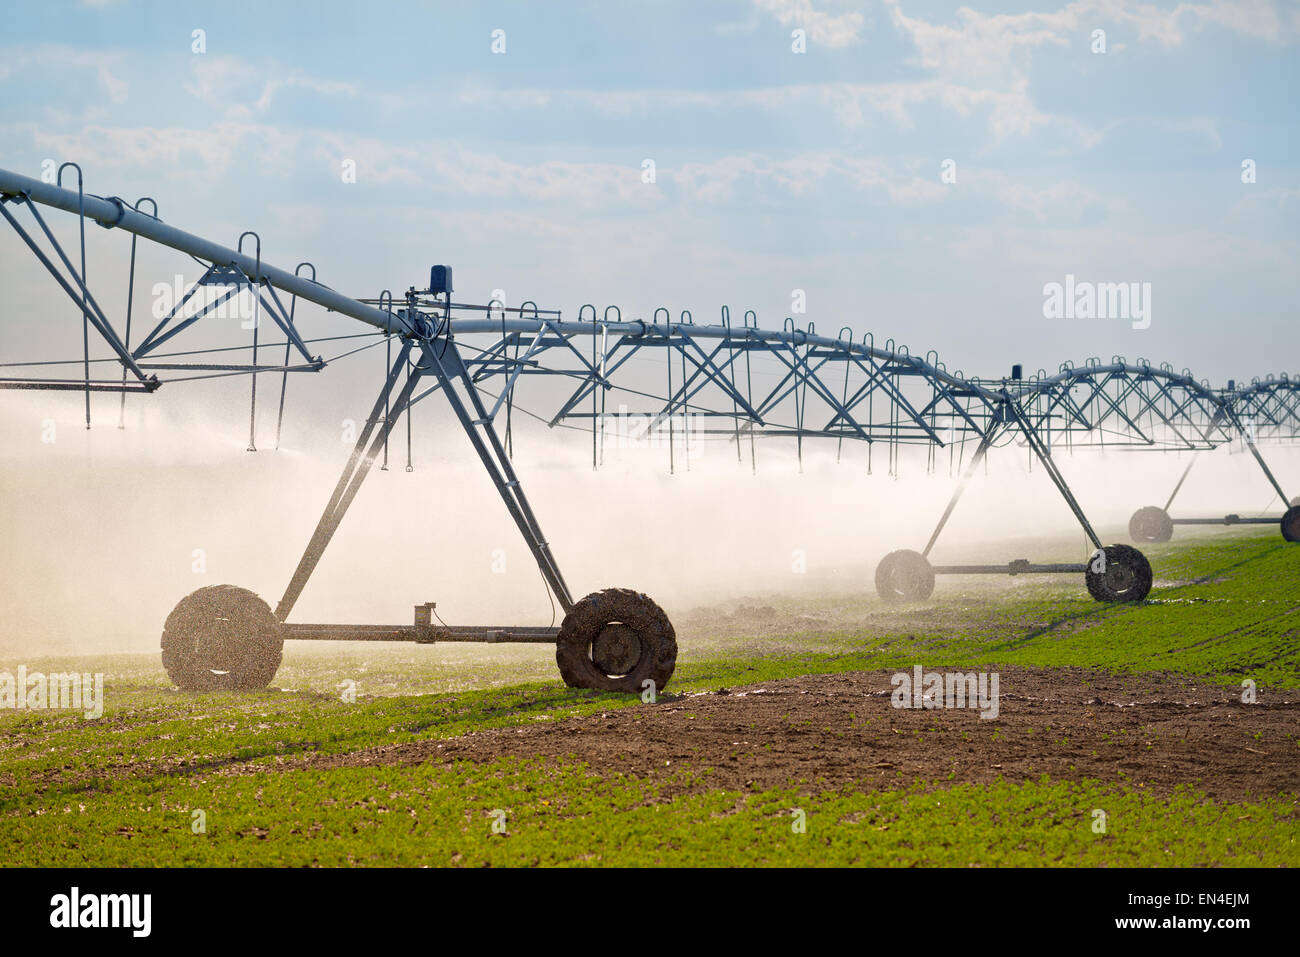 Automated Farming Irrigation Sprinklers System in Operation on Cultivated Agricultural Field Stock Photo